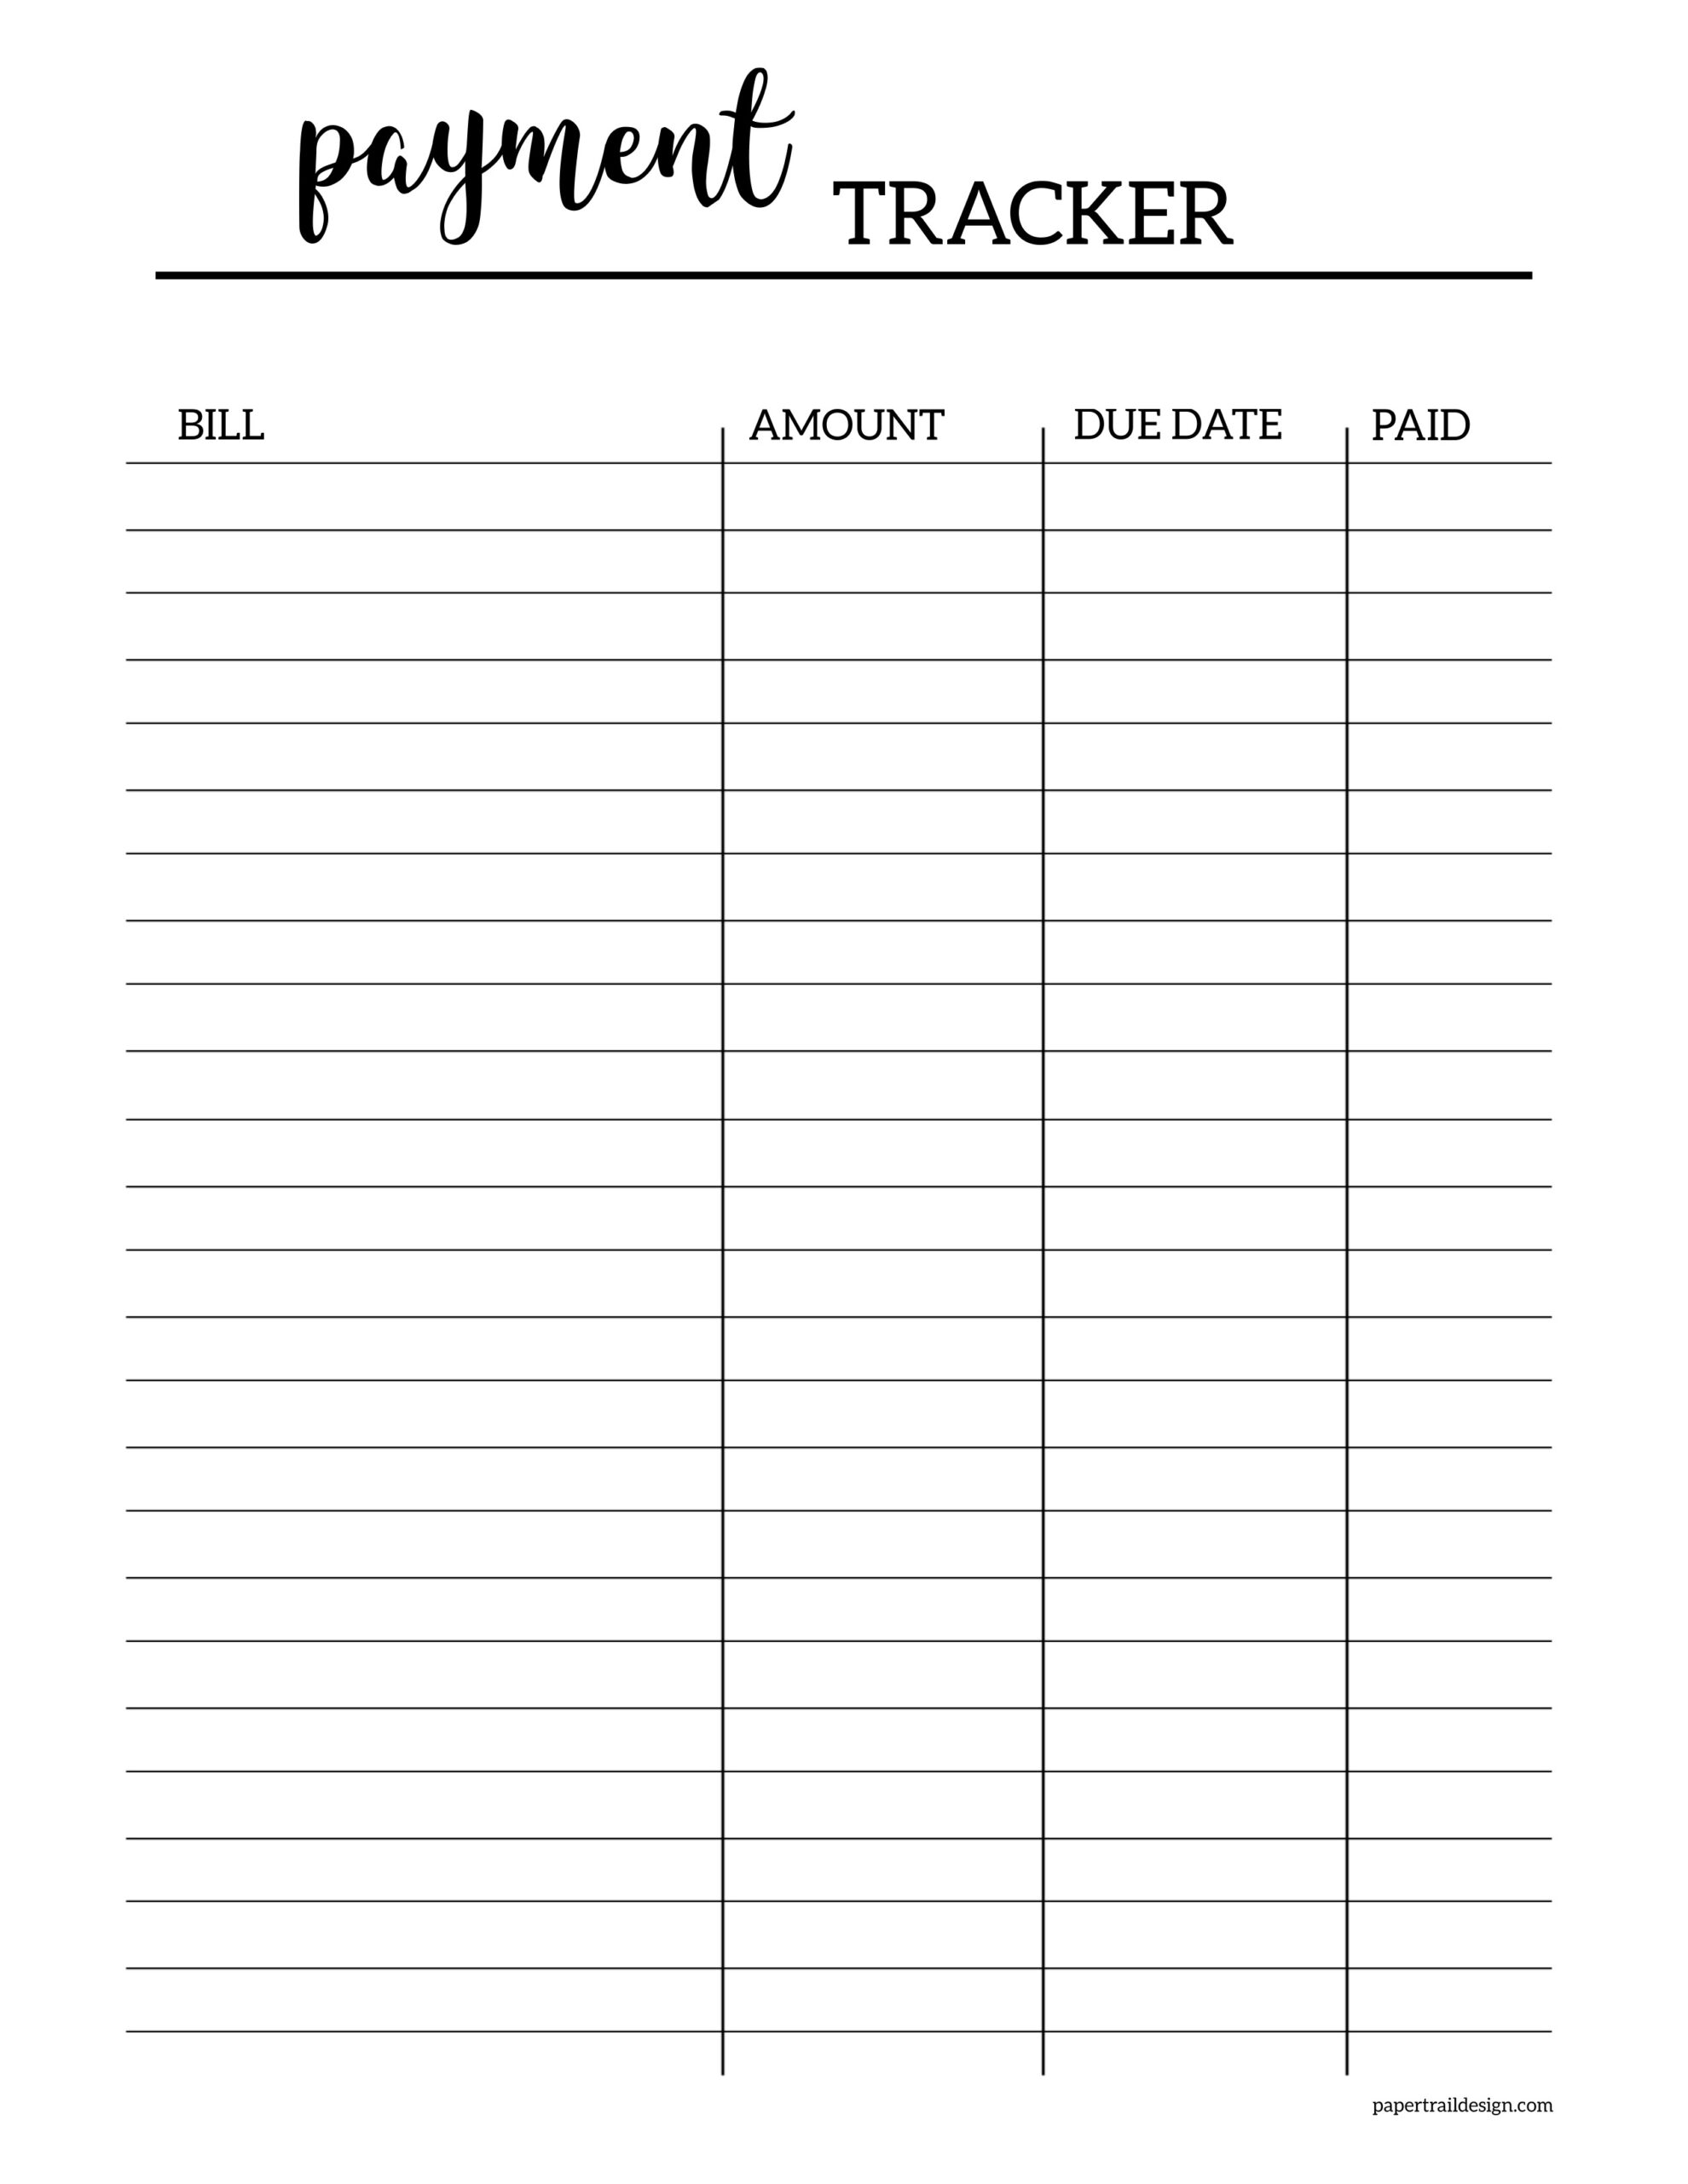 planner-bill-tracker-pdf-printable-inserts-payment-organizer-yearly